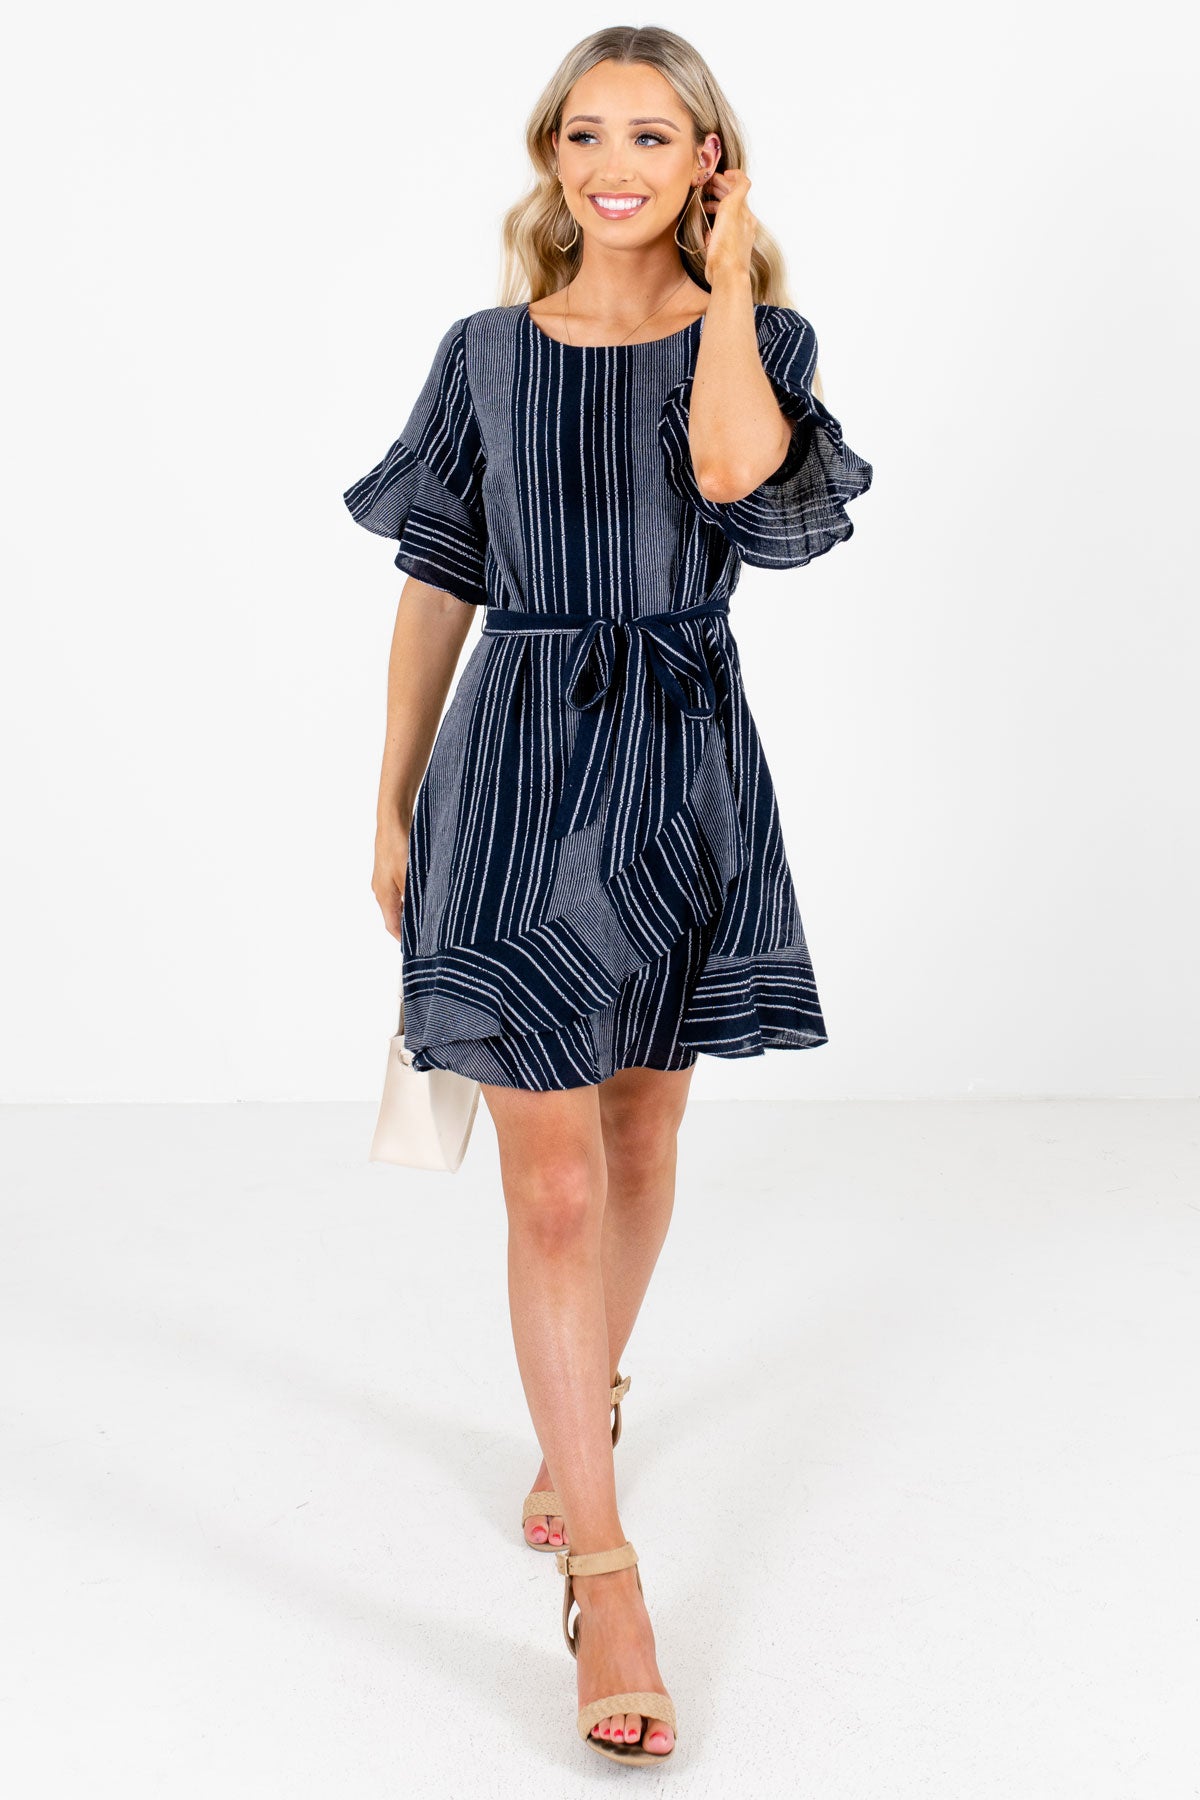 Women's Navy Blue Spring and Summertime Boutique Clothing